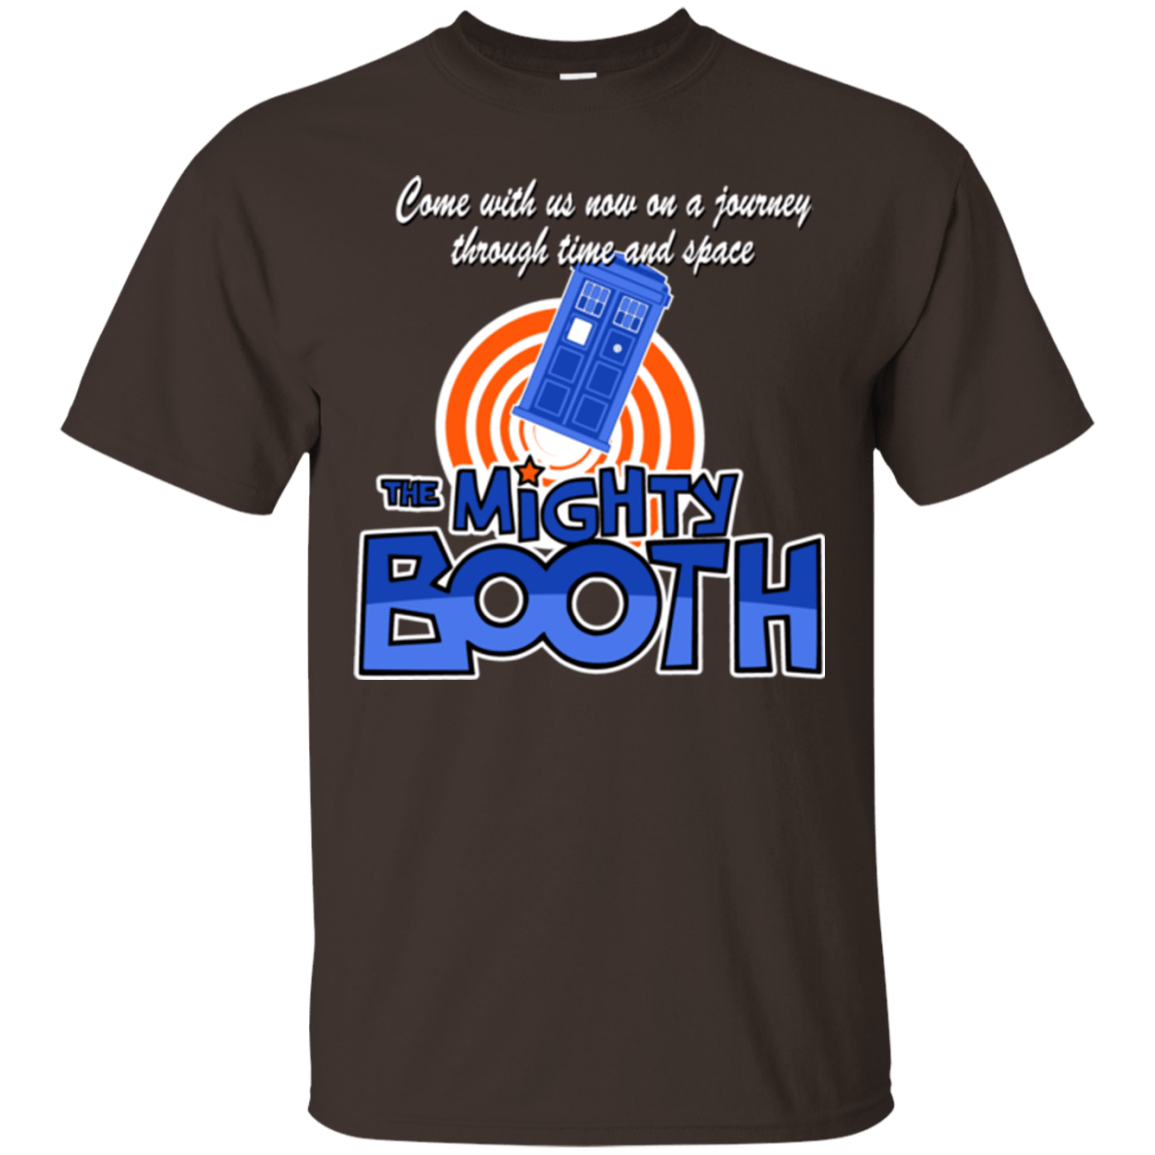 T-Shirts Dark Chocolate / Small Mighty Booth T-Shirt